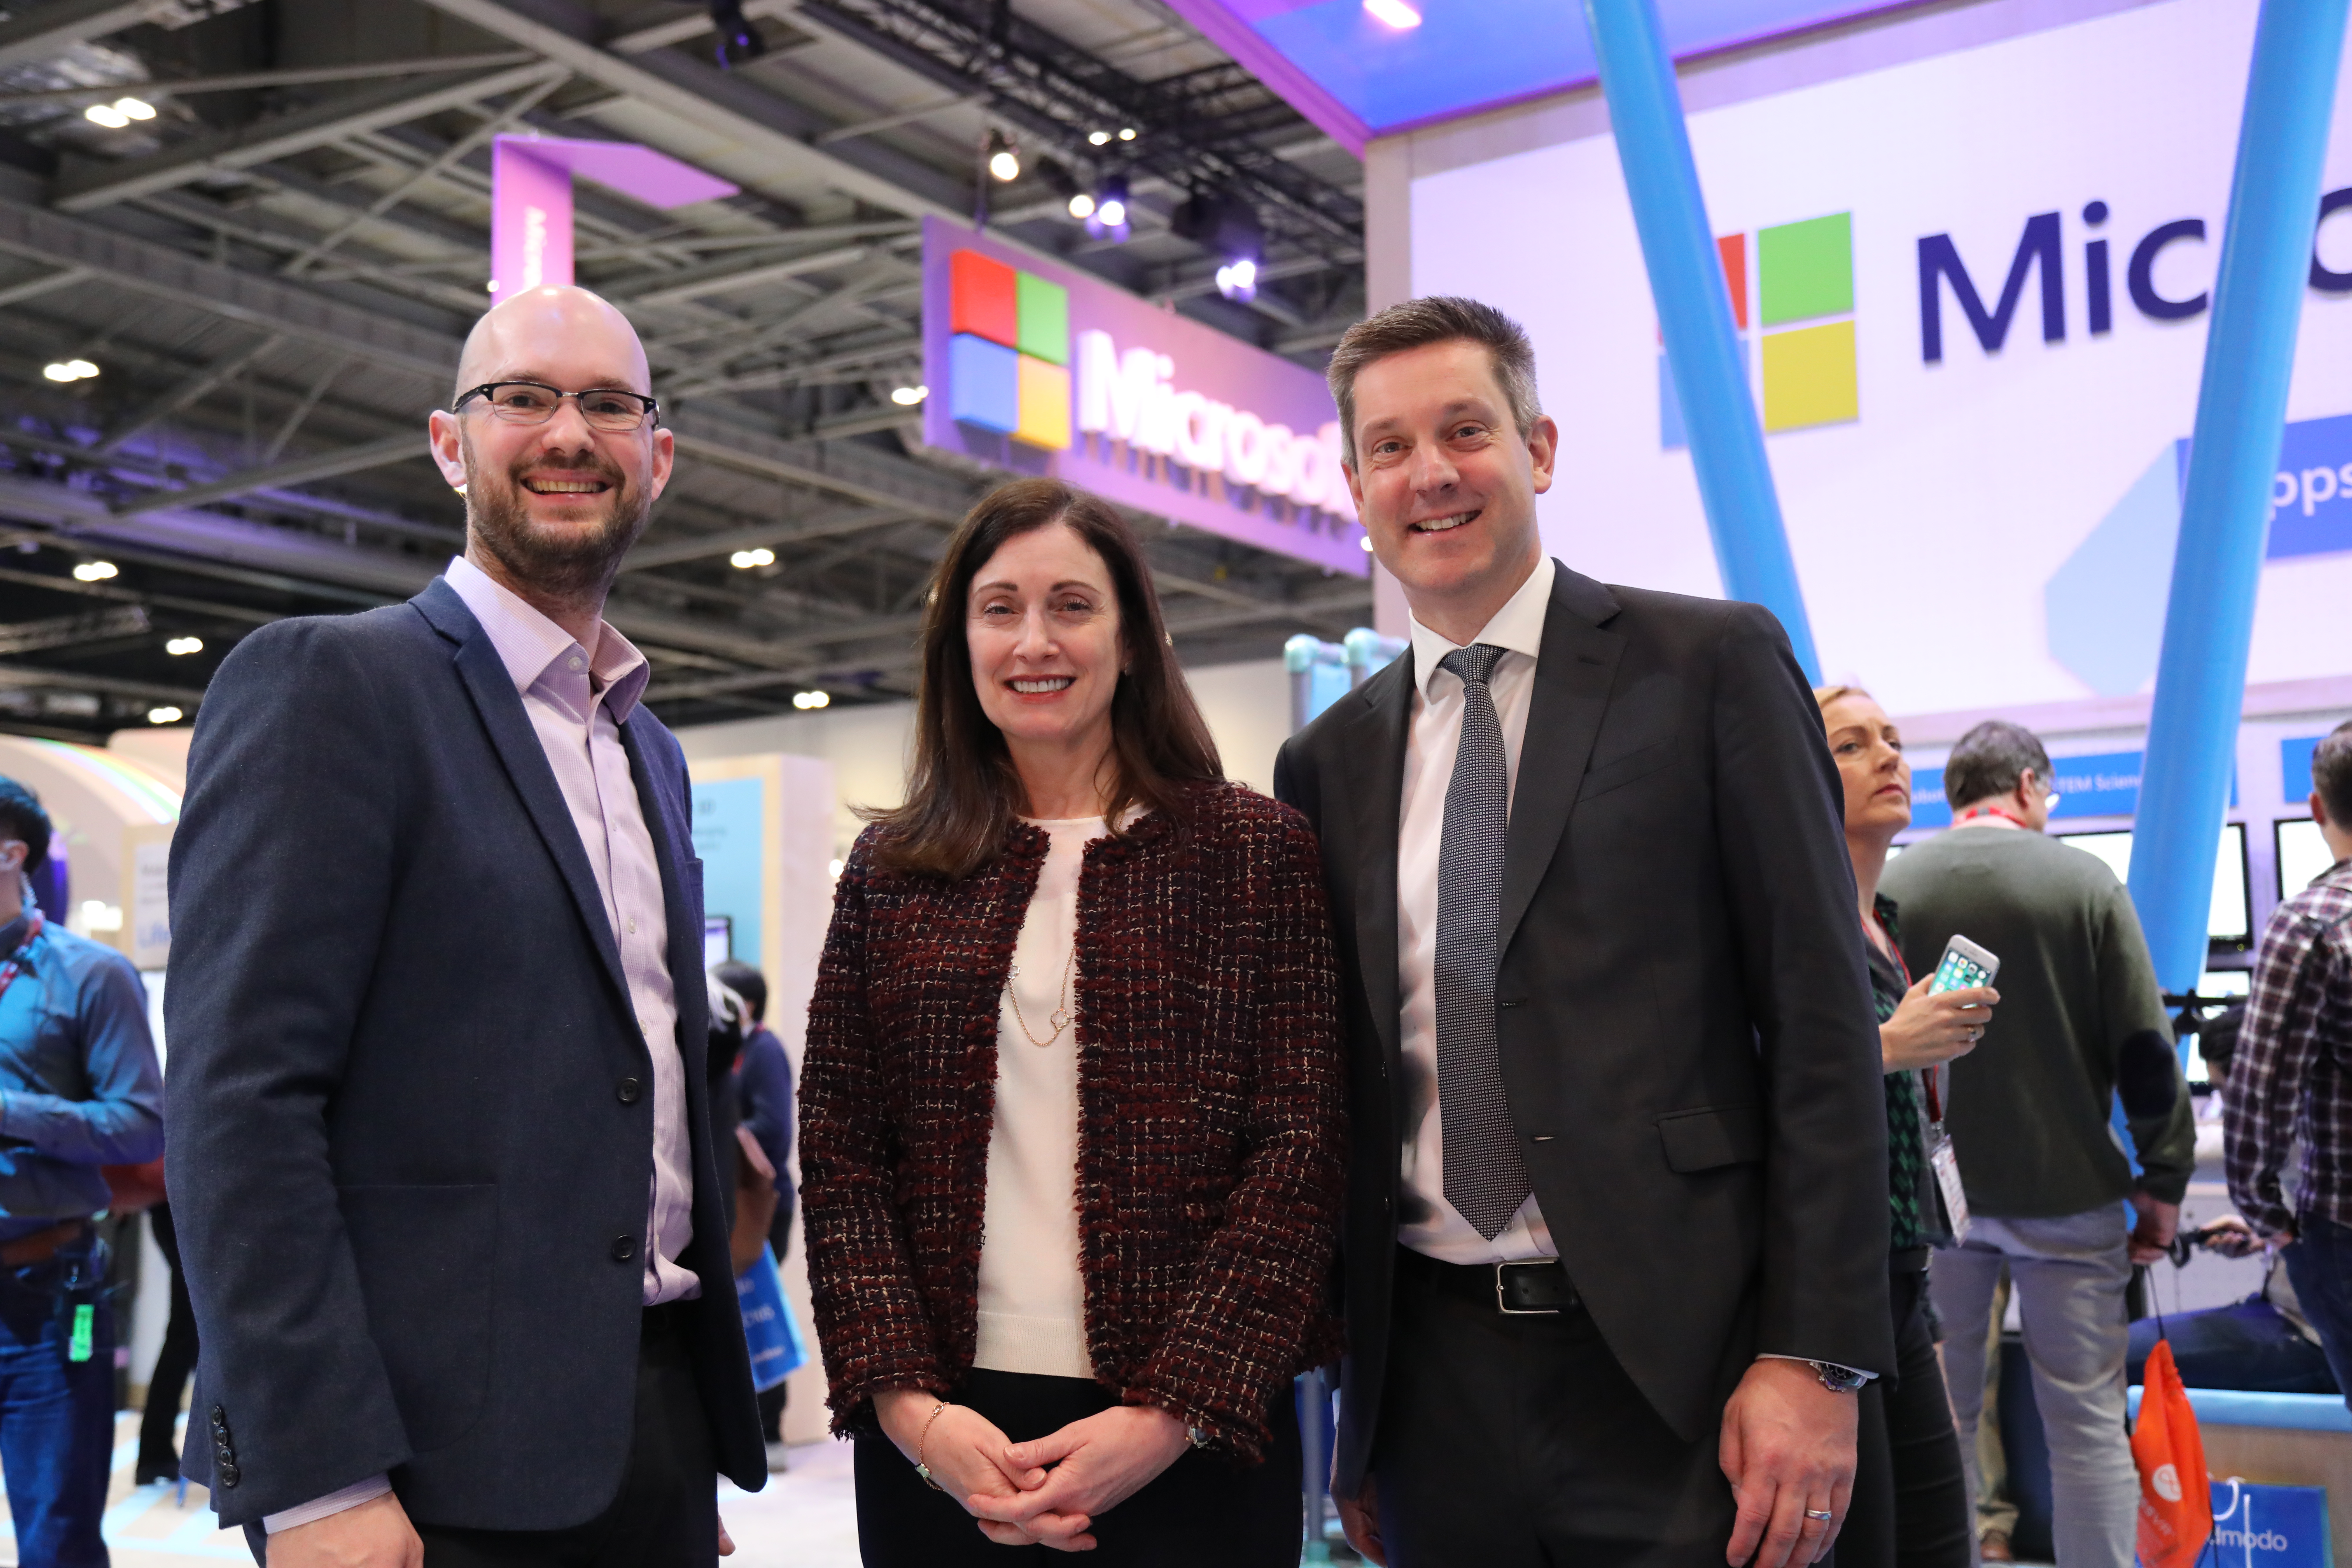 Microsoft UK CEO CIndy Rose with Chris Rothwell (left), Director of Education, and Chris Perkins, General Managr of Public Sector